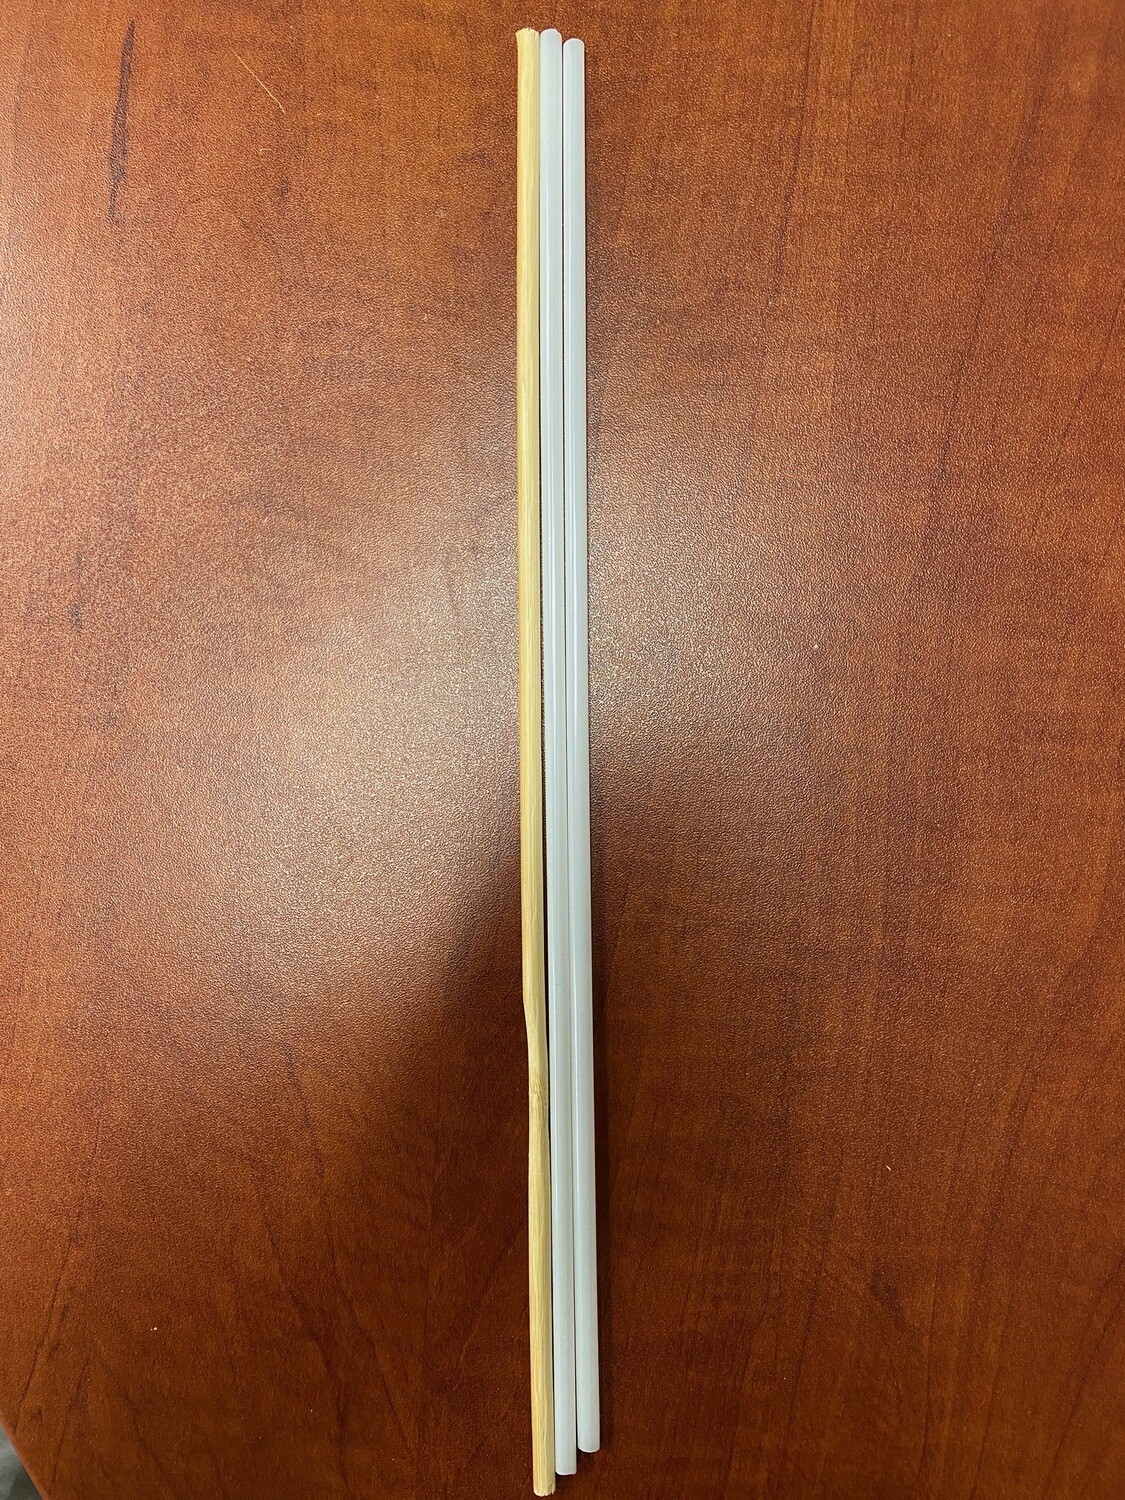 A safety rod and two plastic straws